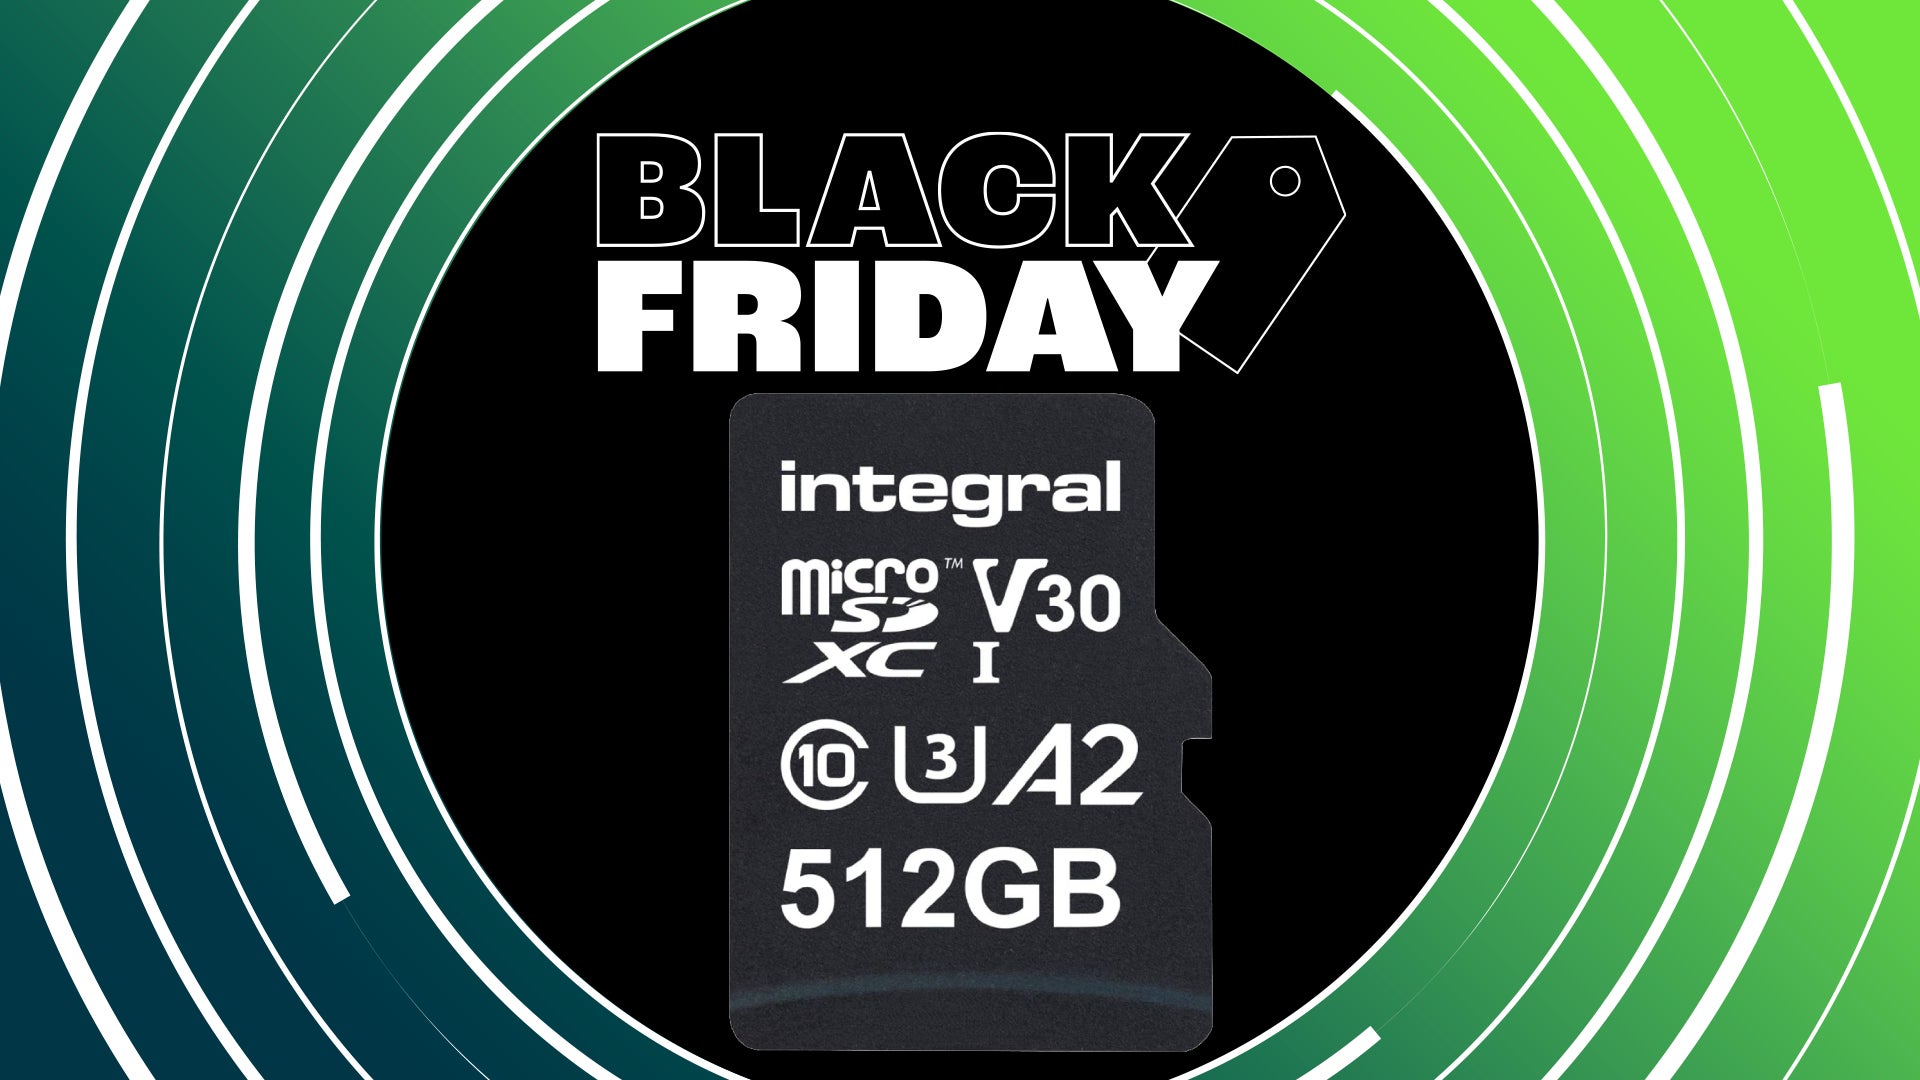 Image for The Integral 512GB Micro SD Card is at its lowest-ever price this Black Friday weekend